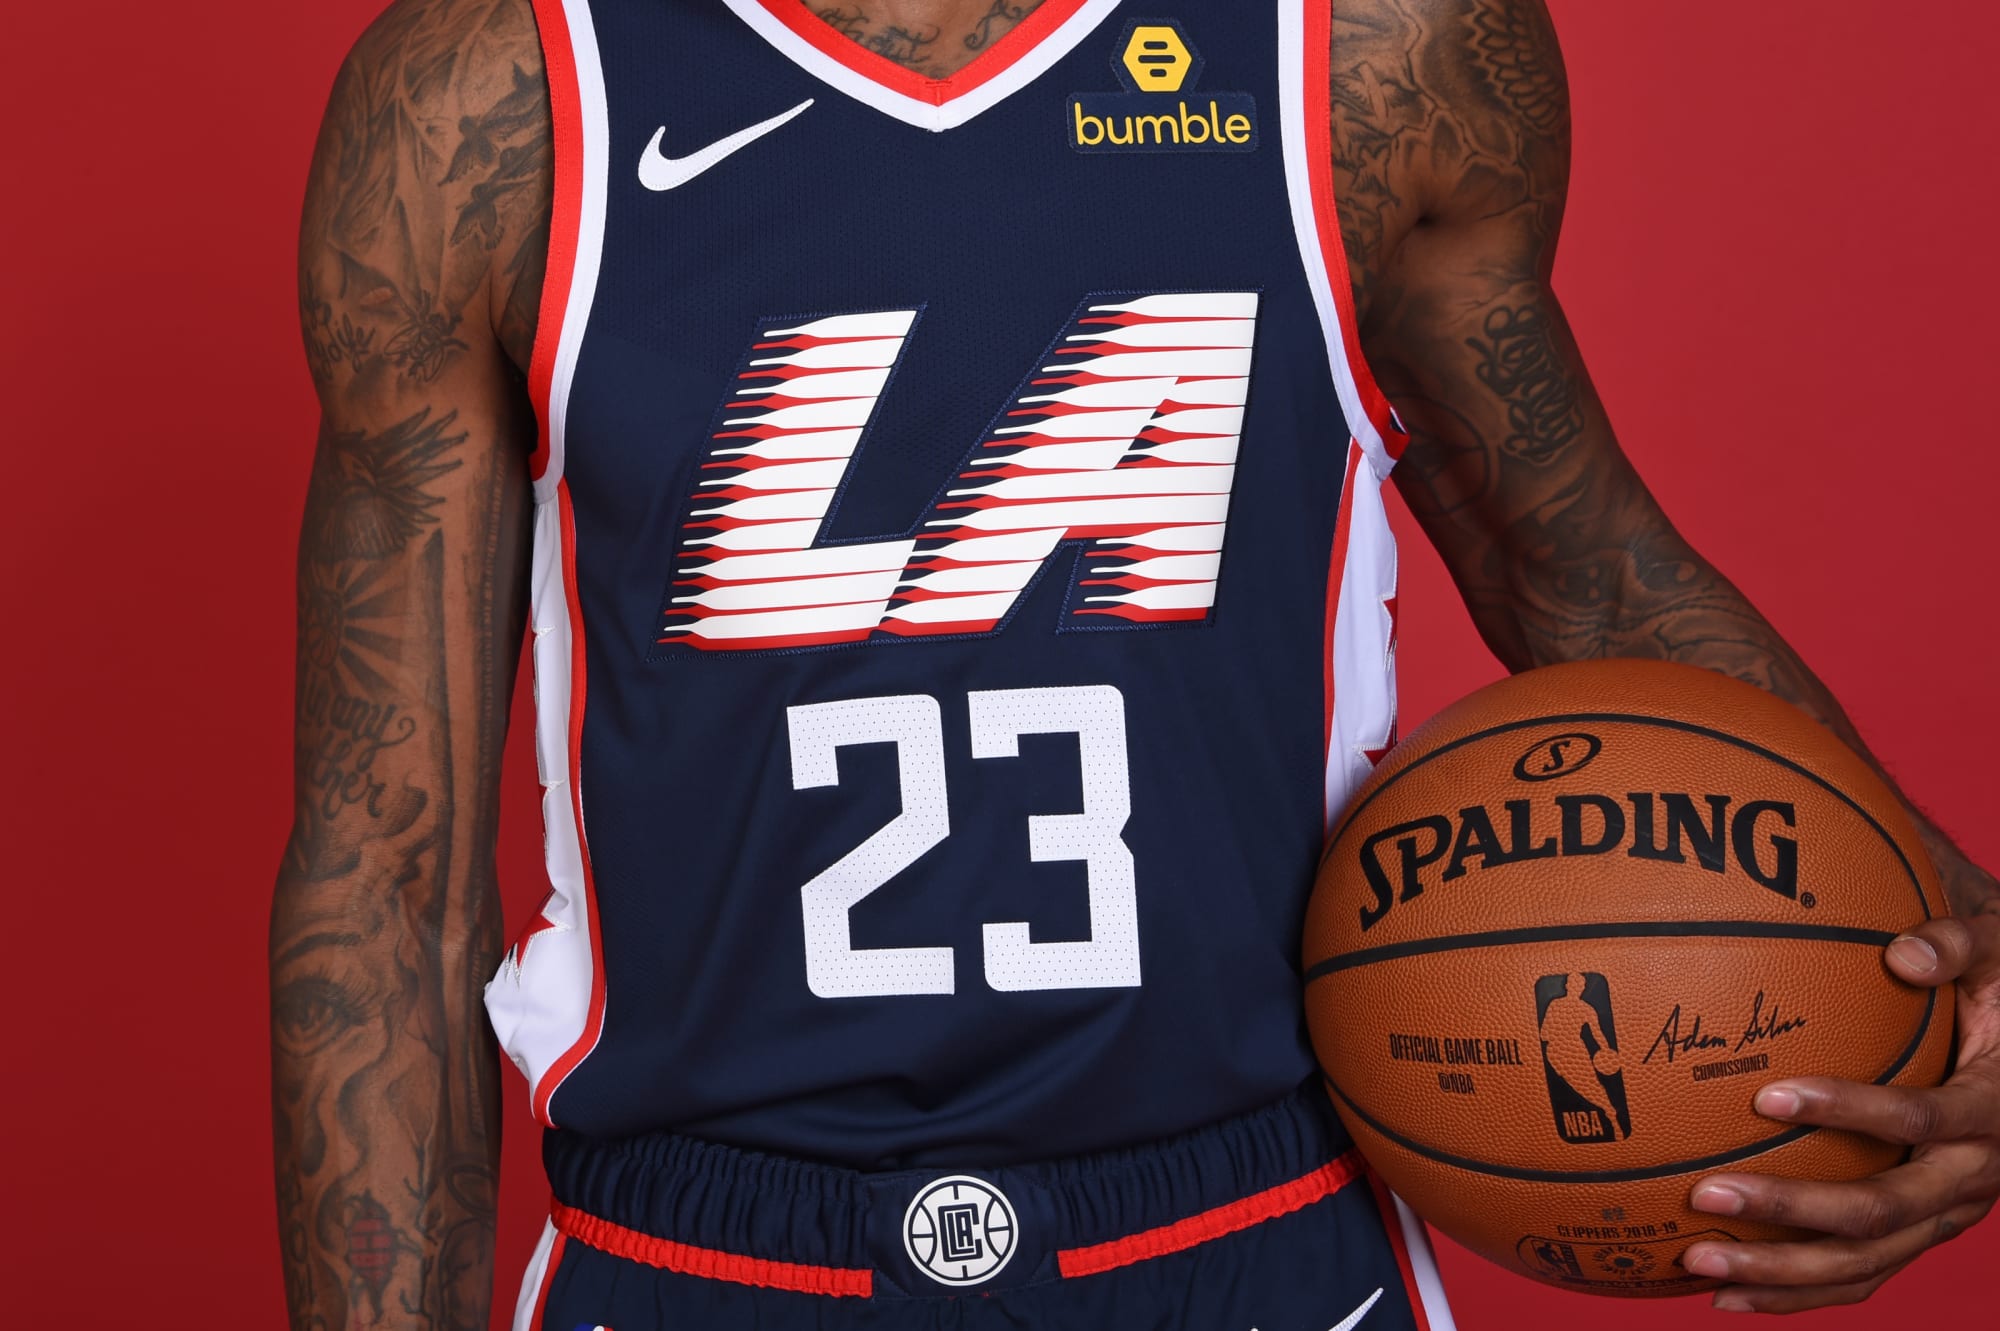 NBA City Jersey Rankings How the LA Clippers compare to everyone else